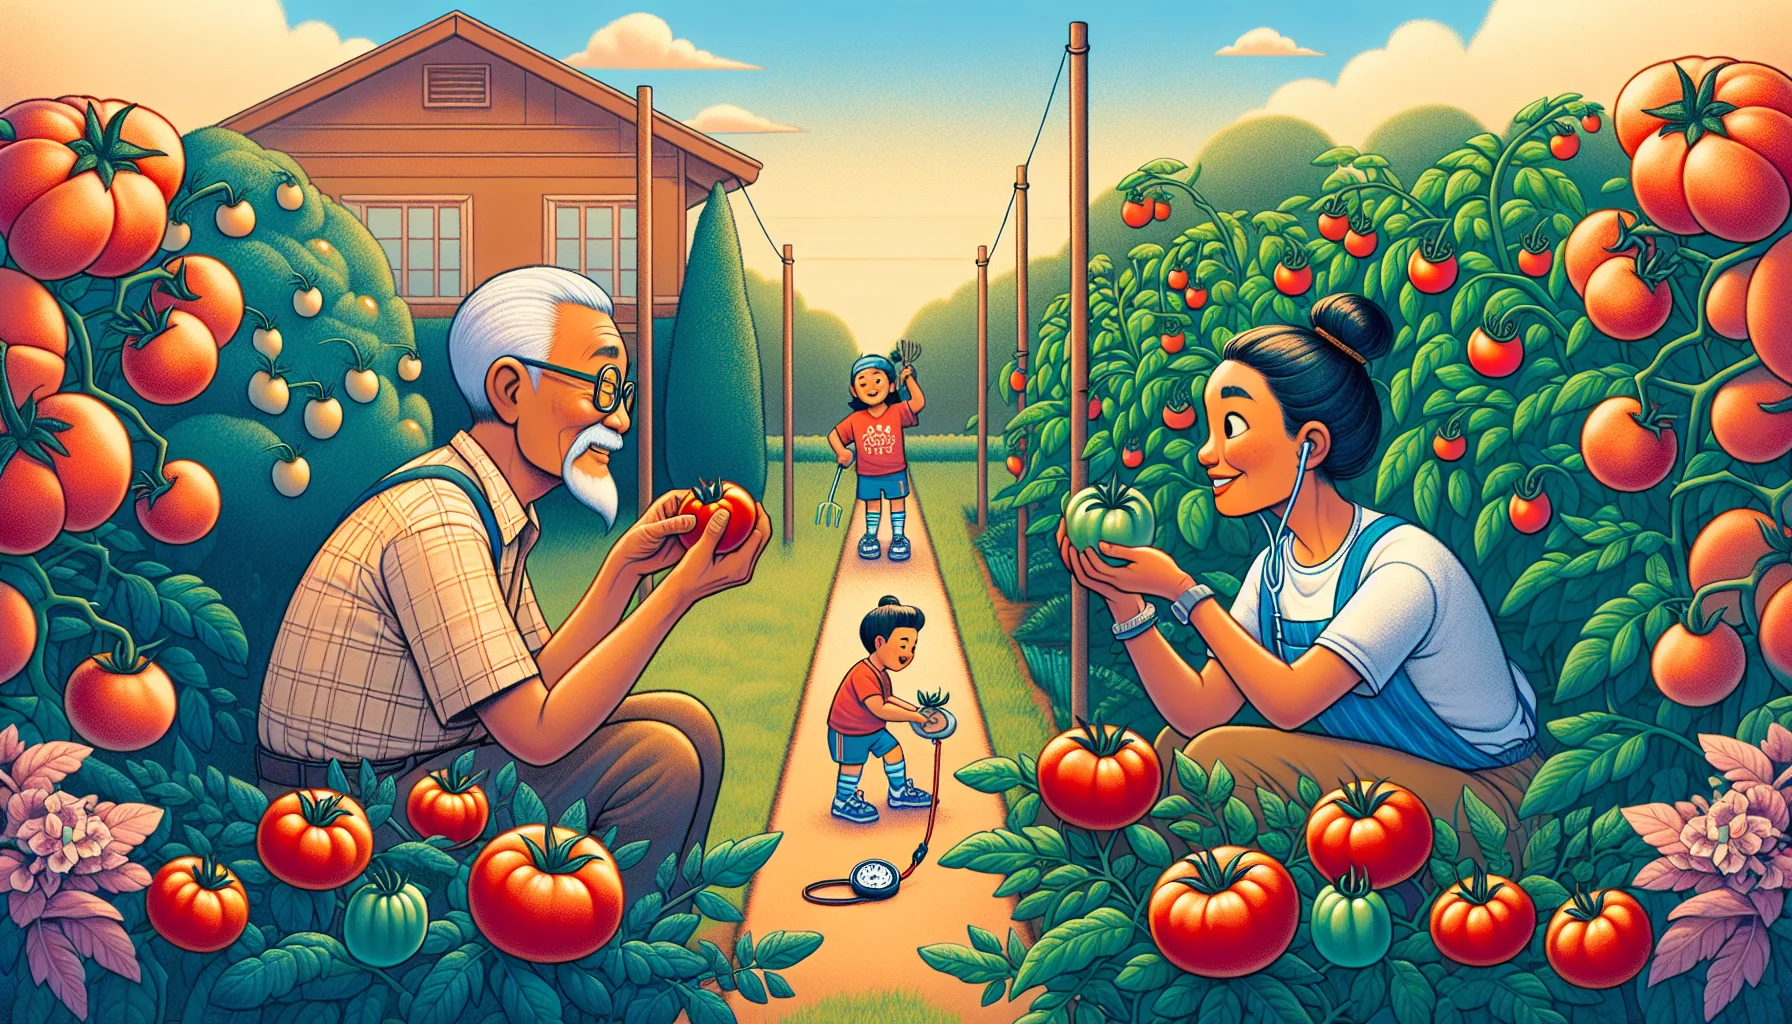 Illustrate a humorous, lifelike scenario about growing top-quality tomatoes. Picture an elderly Asian man and a young Hispanic woman engaging in a friendly rivalry in their neighboring backyards. Each takes an extremely exaggerated approach to tomato care: the man is delicately pampering a tomato with a small blanket and lullaby, while the woman is training her tomatoes like athletes, with minuscule sweatbands and a whistle. Emphasize the lush tomato plants around them and let the warmth of the sun and the vibrant greenery encapsulate the joy of gardening.